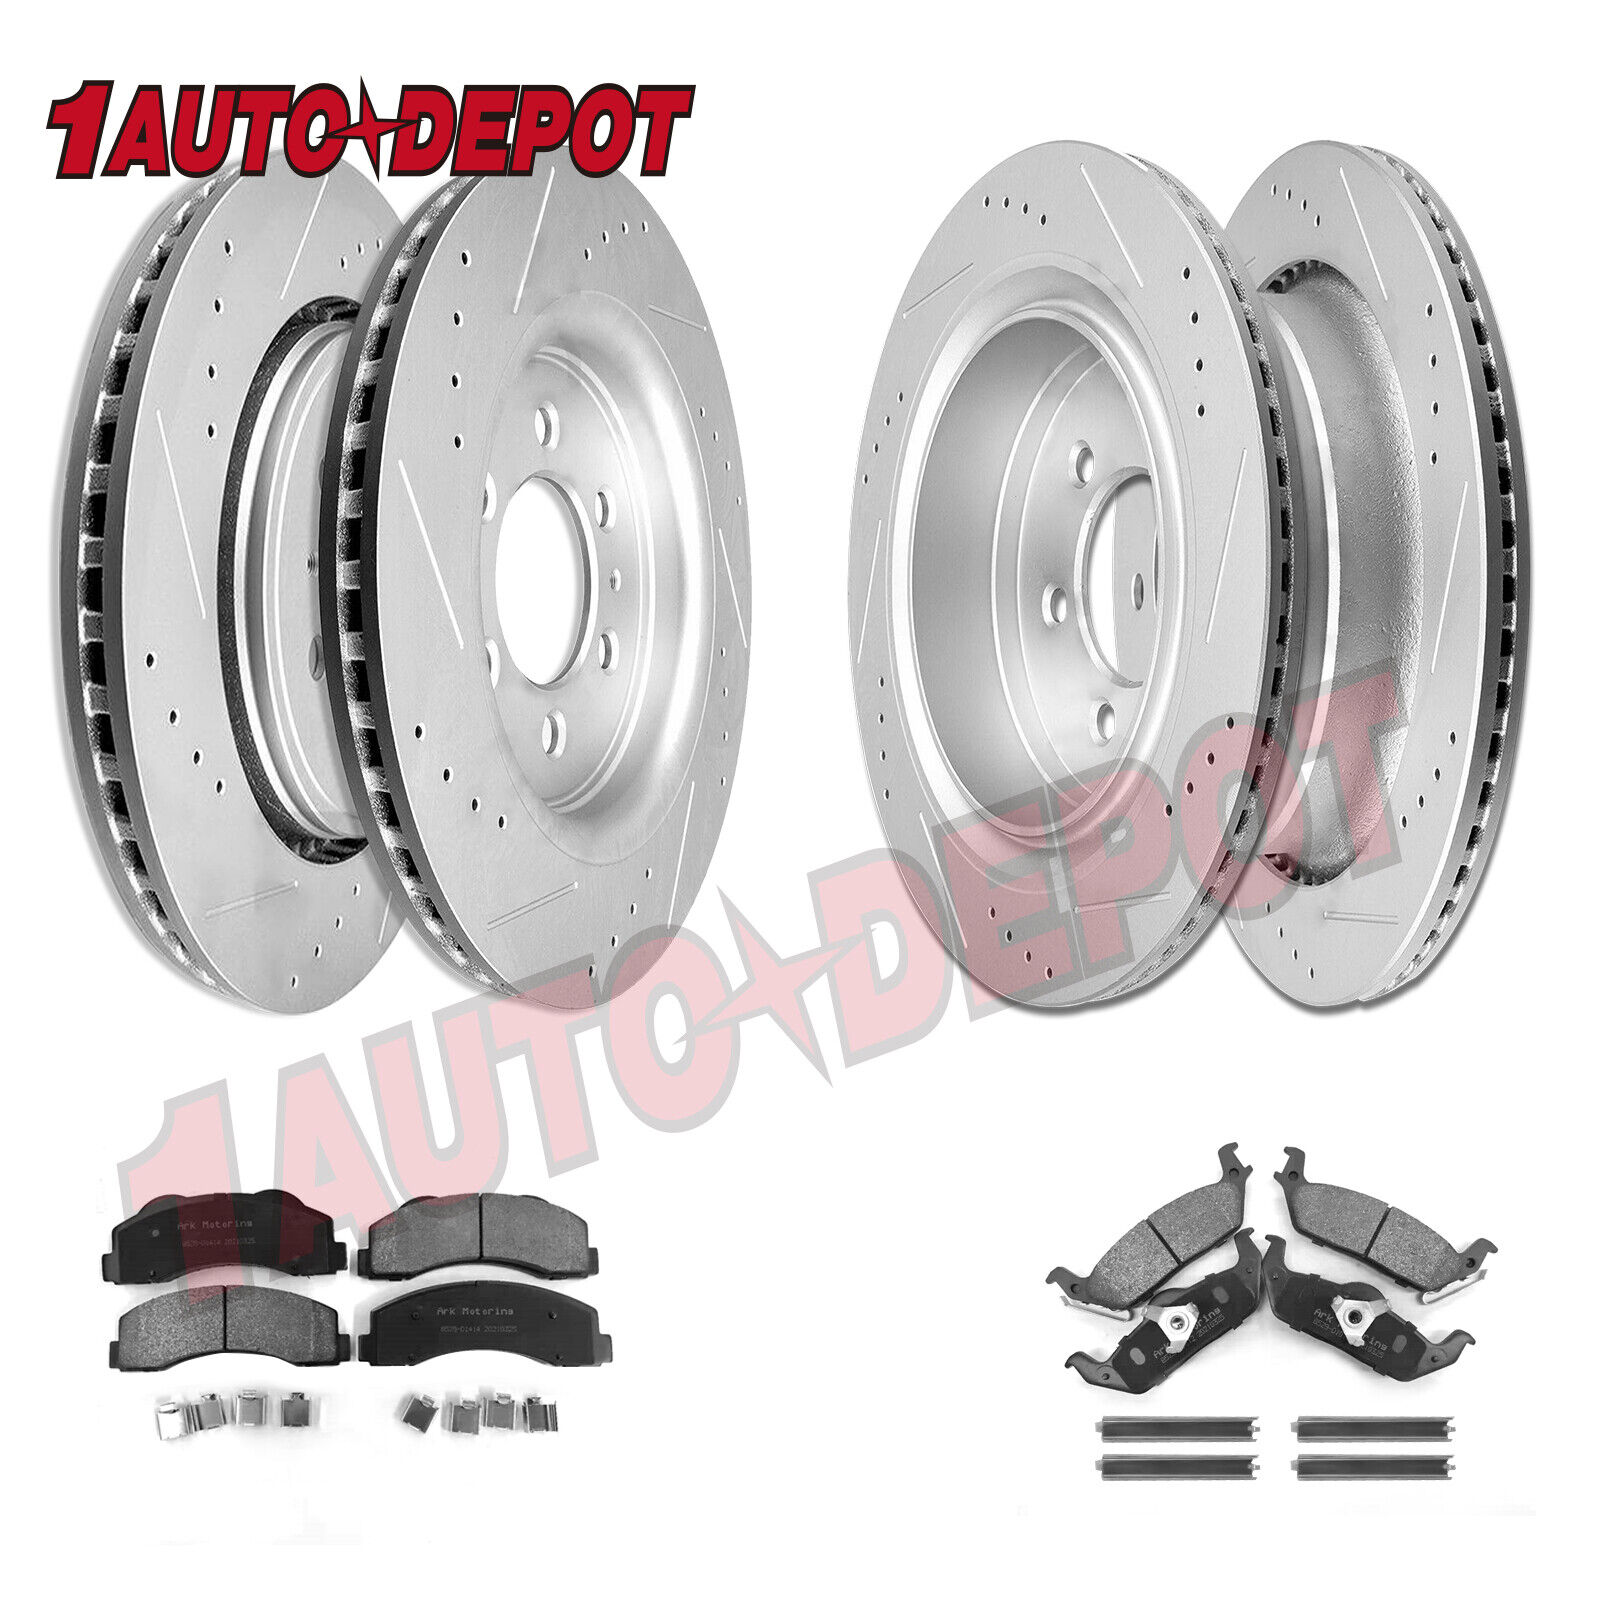 Front & Rear Brake Drilled Disc Rotors + Brake Pads for 2010 2011 Ford F-150 